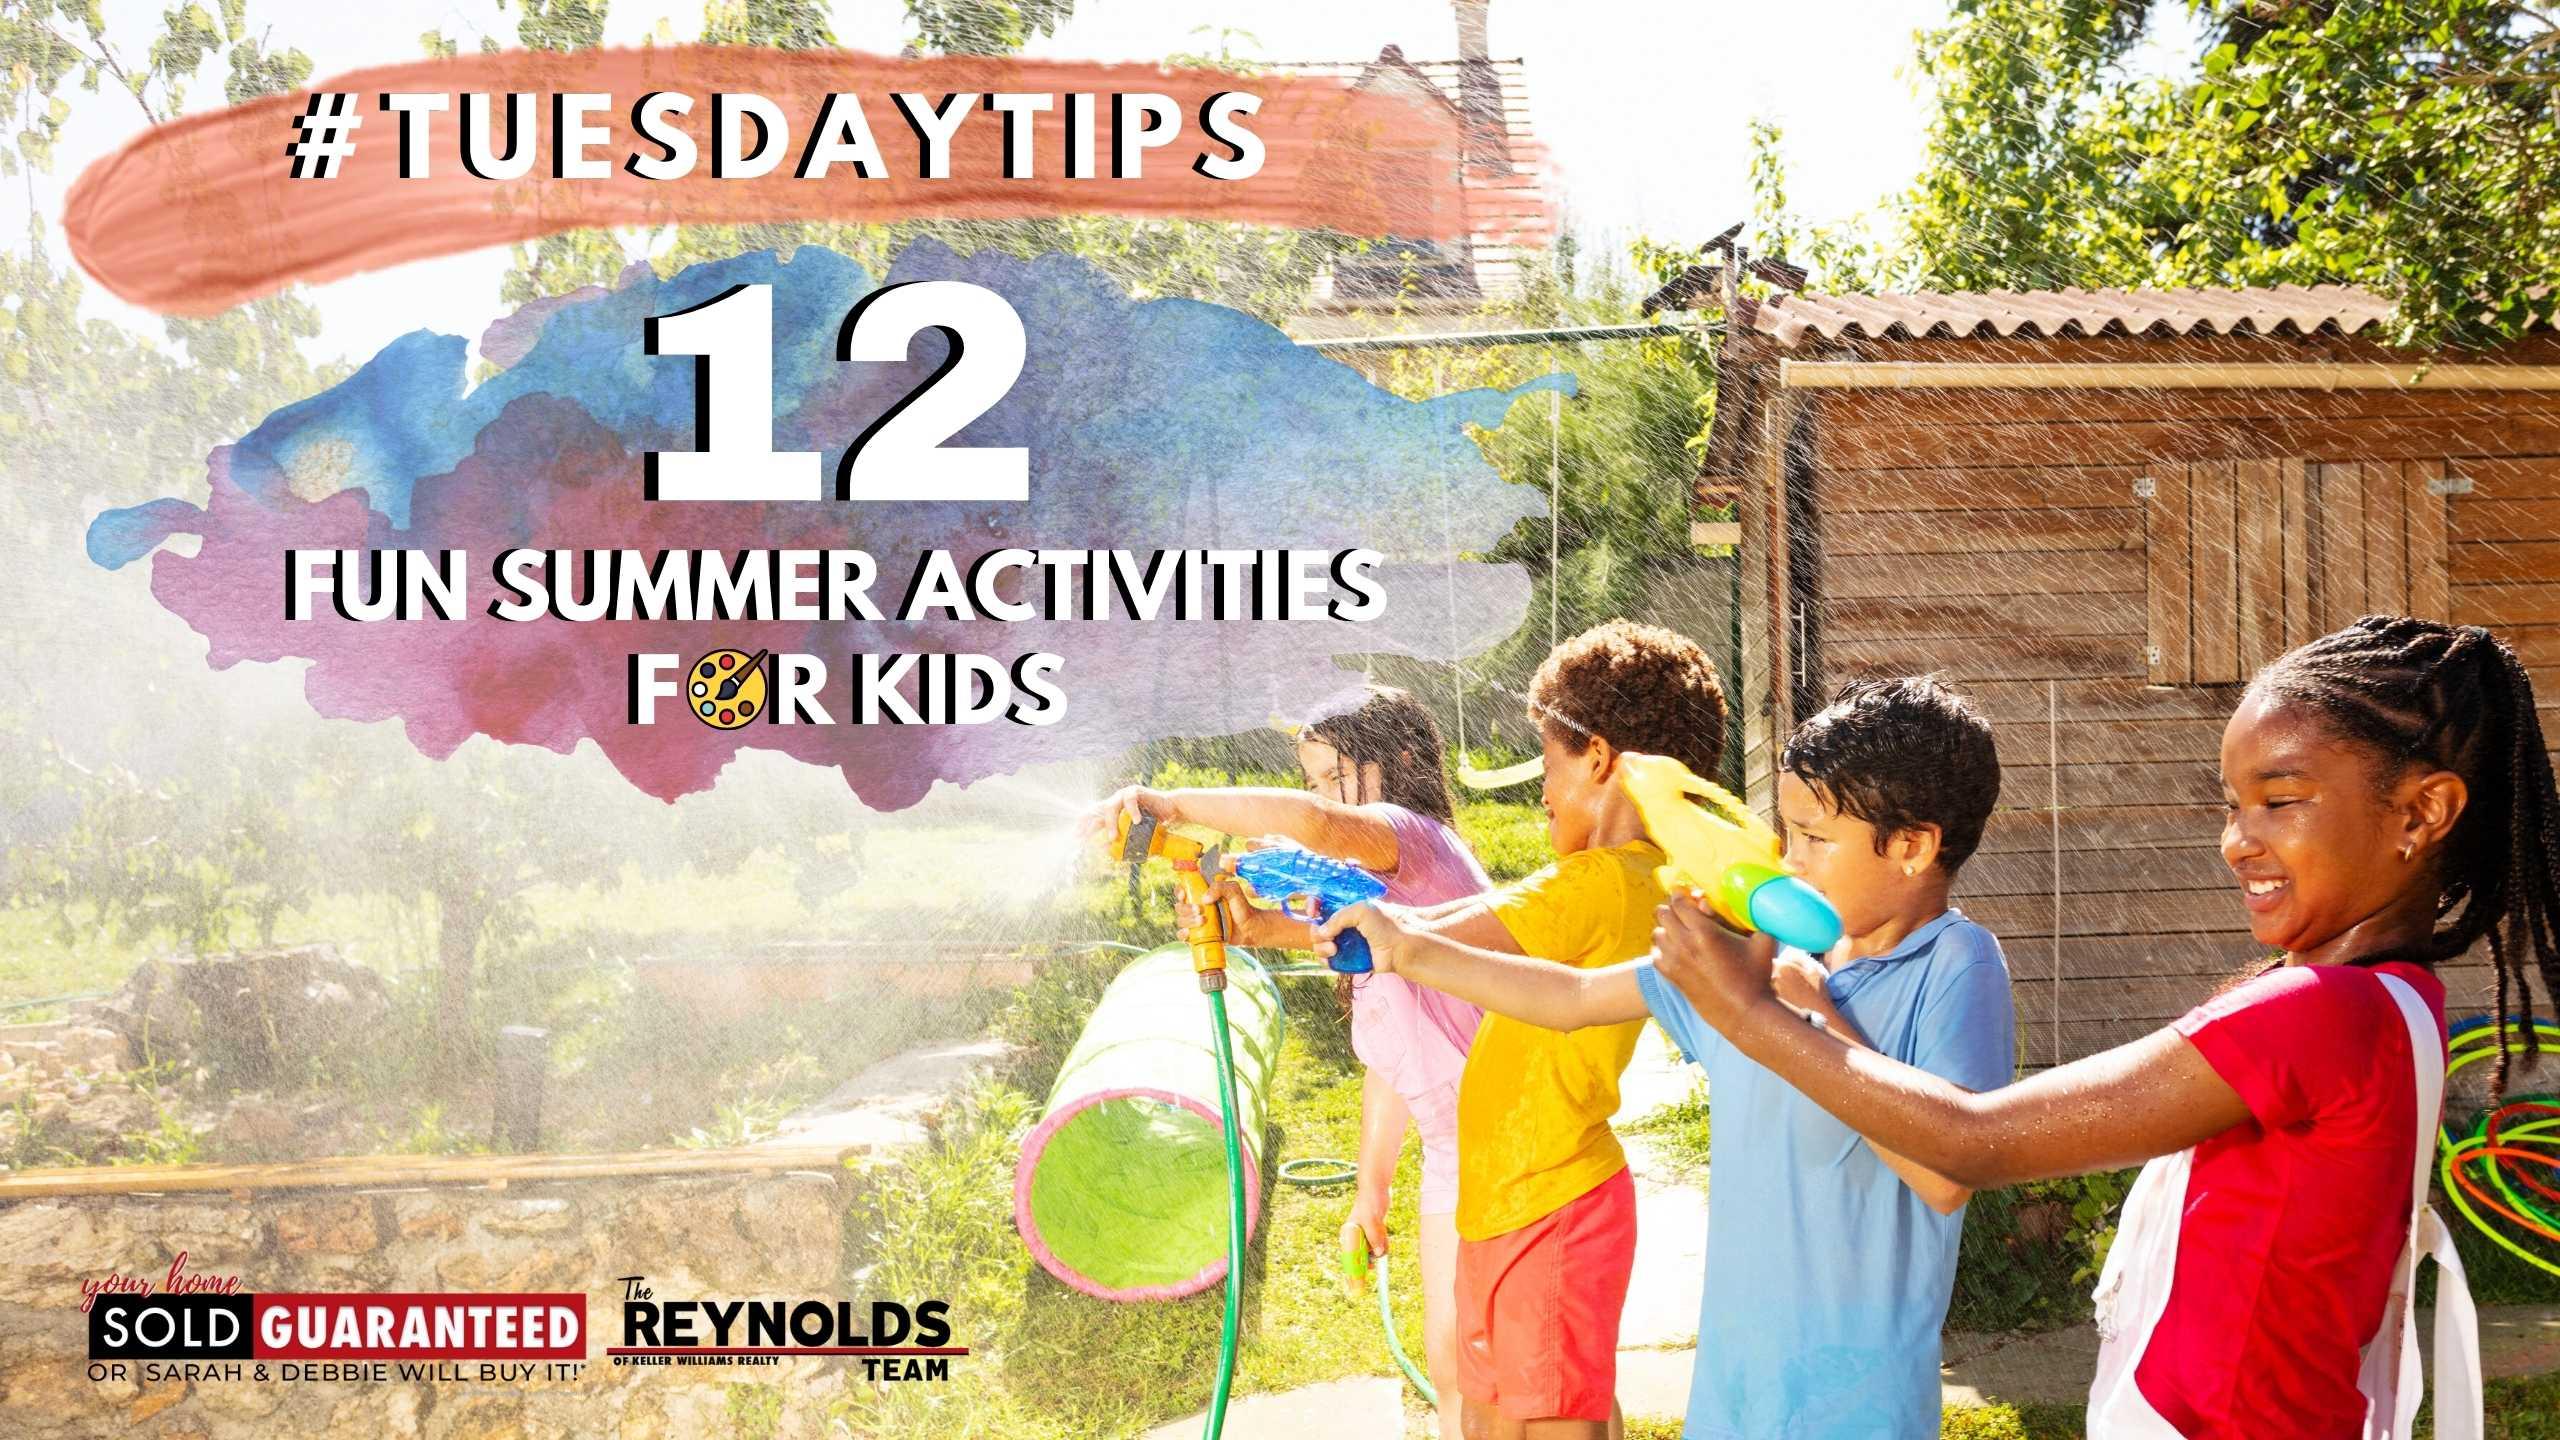 Tuesday Tips: 12 FUN Summer Activities For Kids